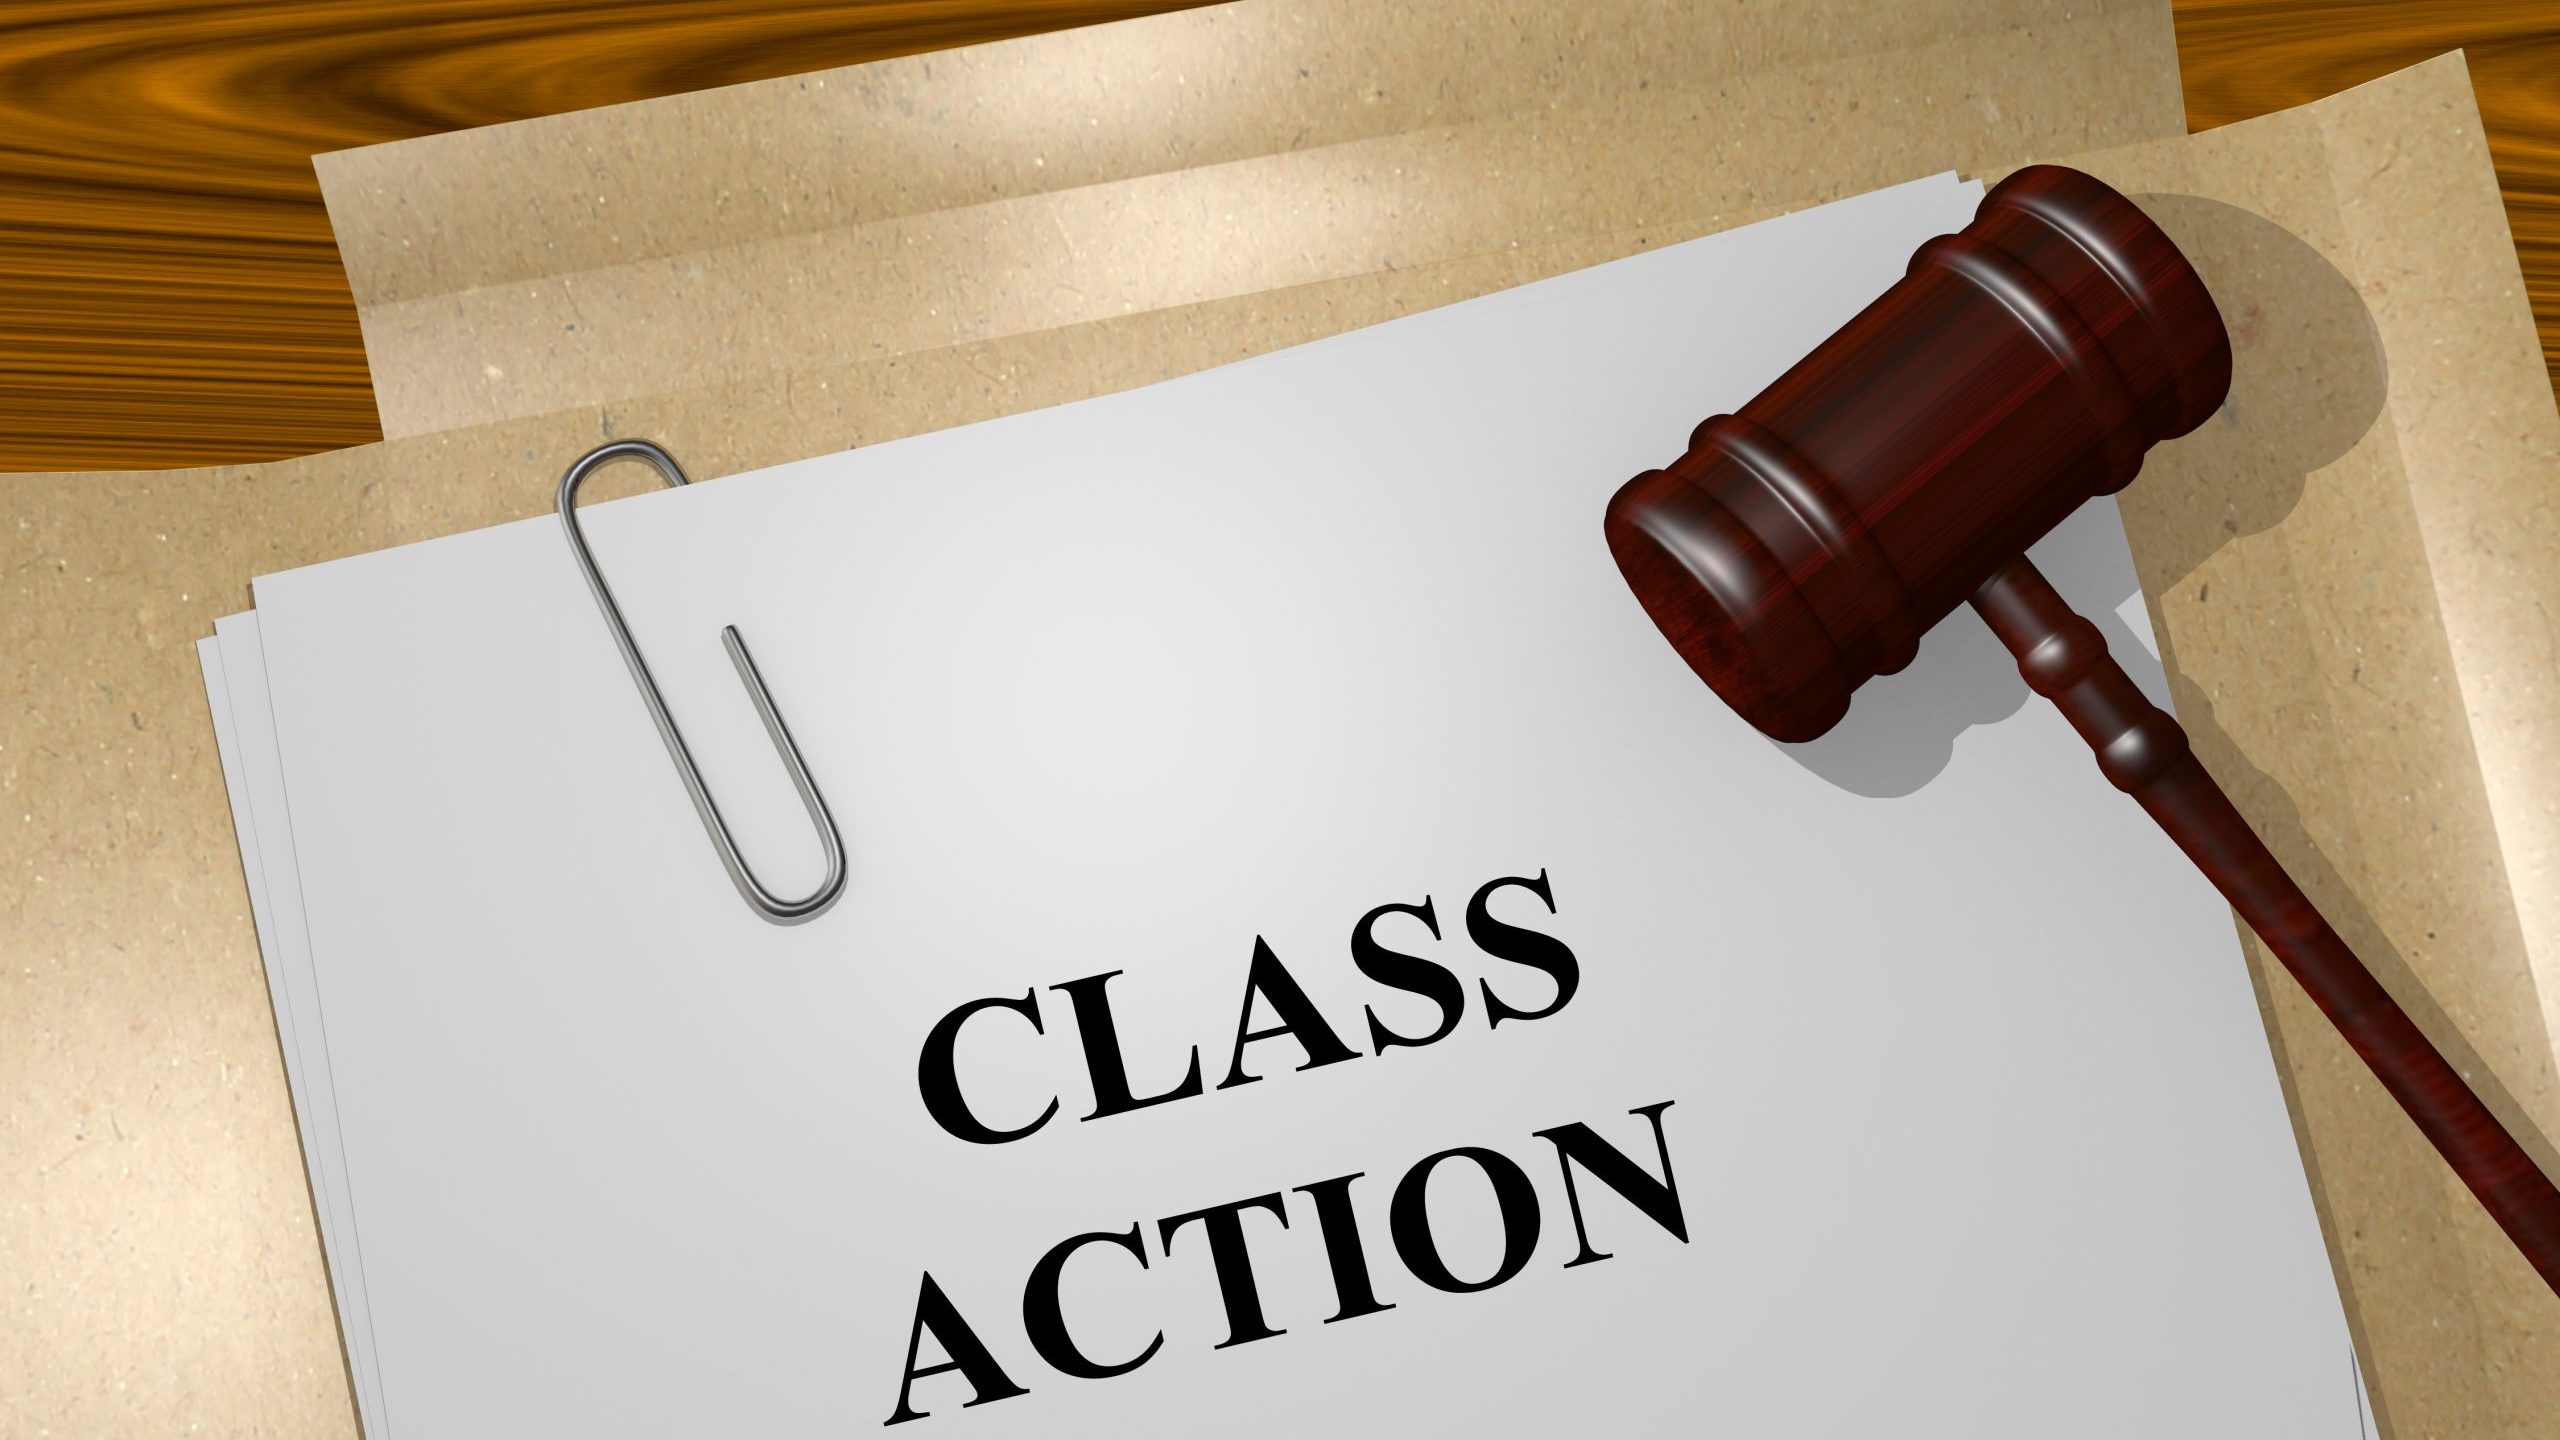 Class action settlement file with gavel